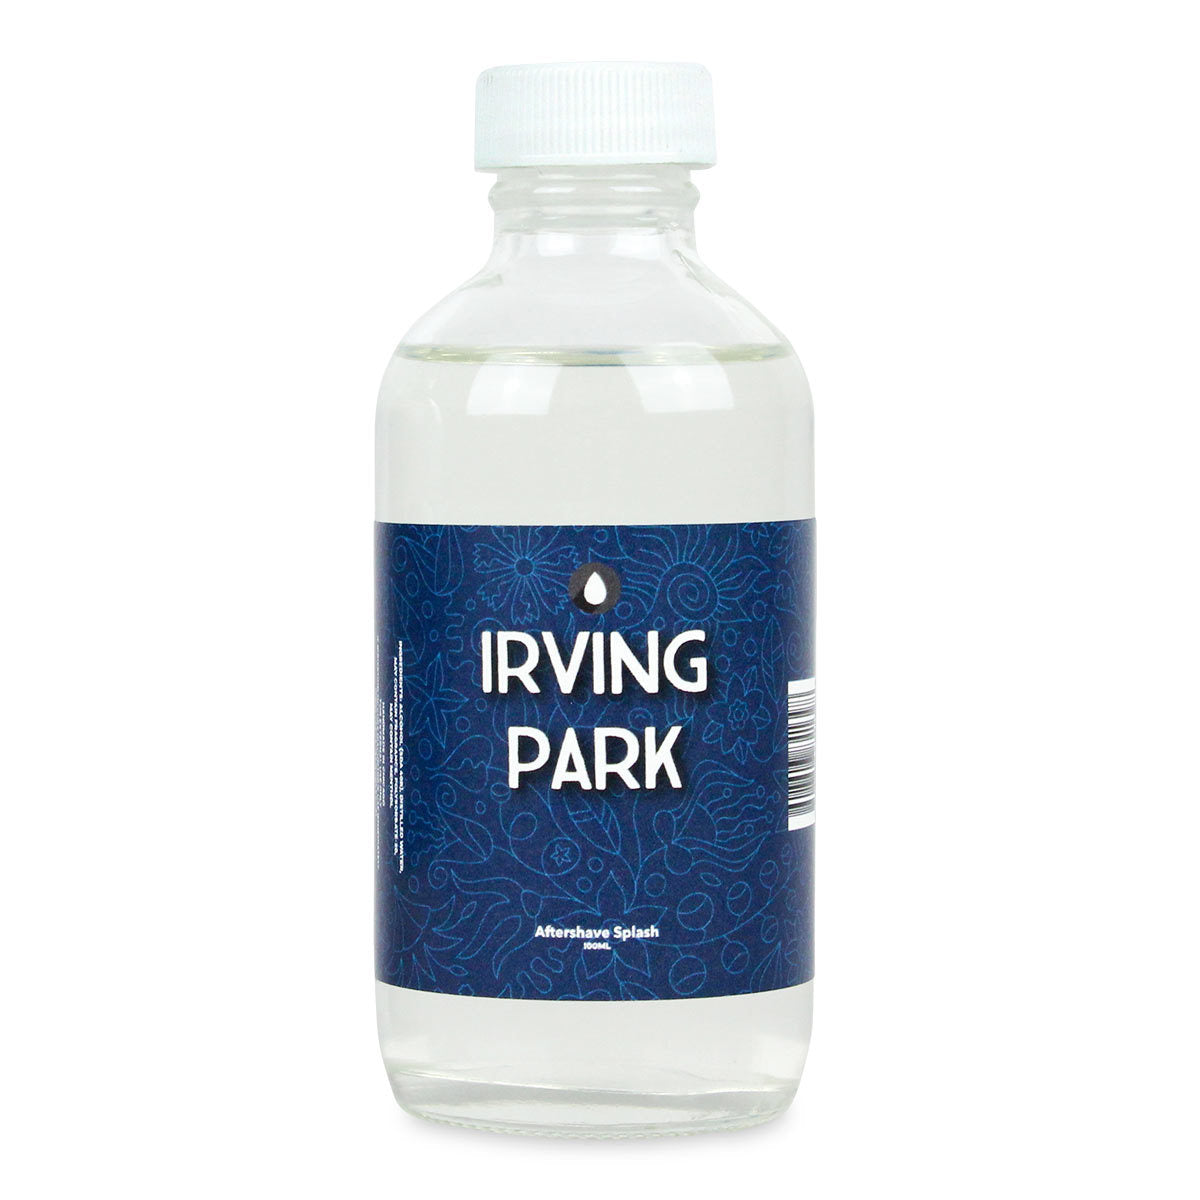 Primary image of Irving Park Aftershave